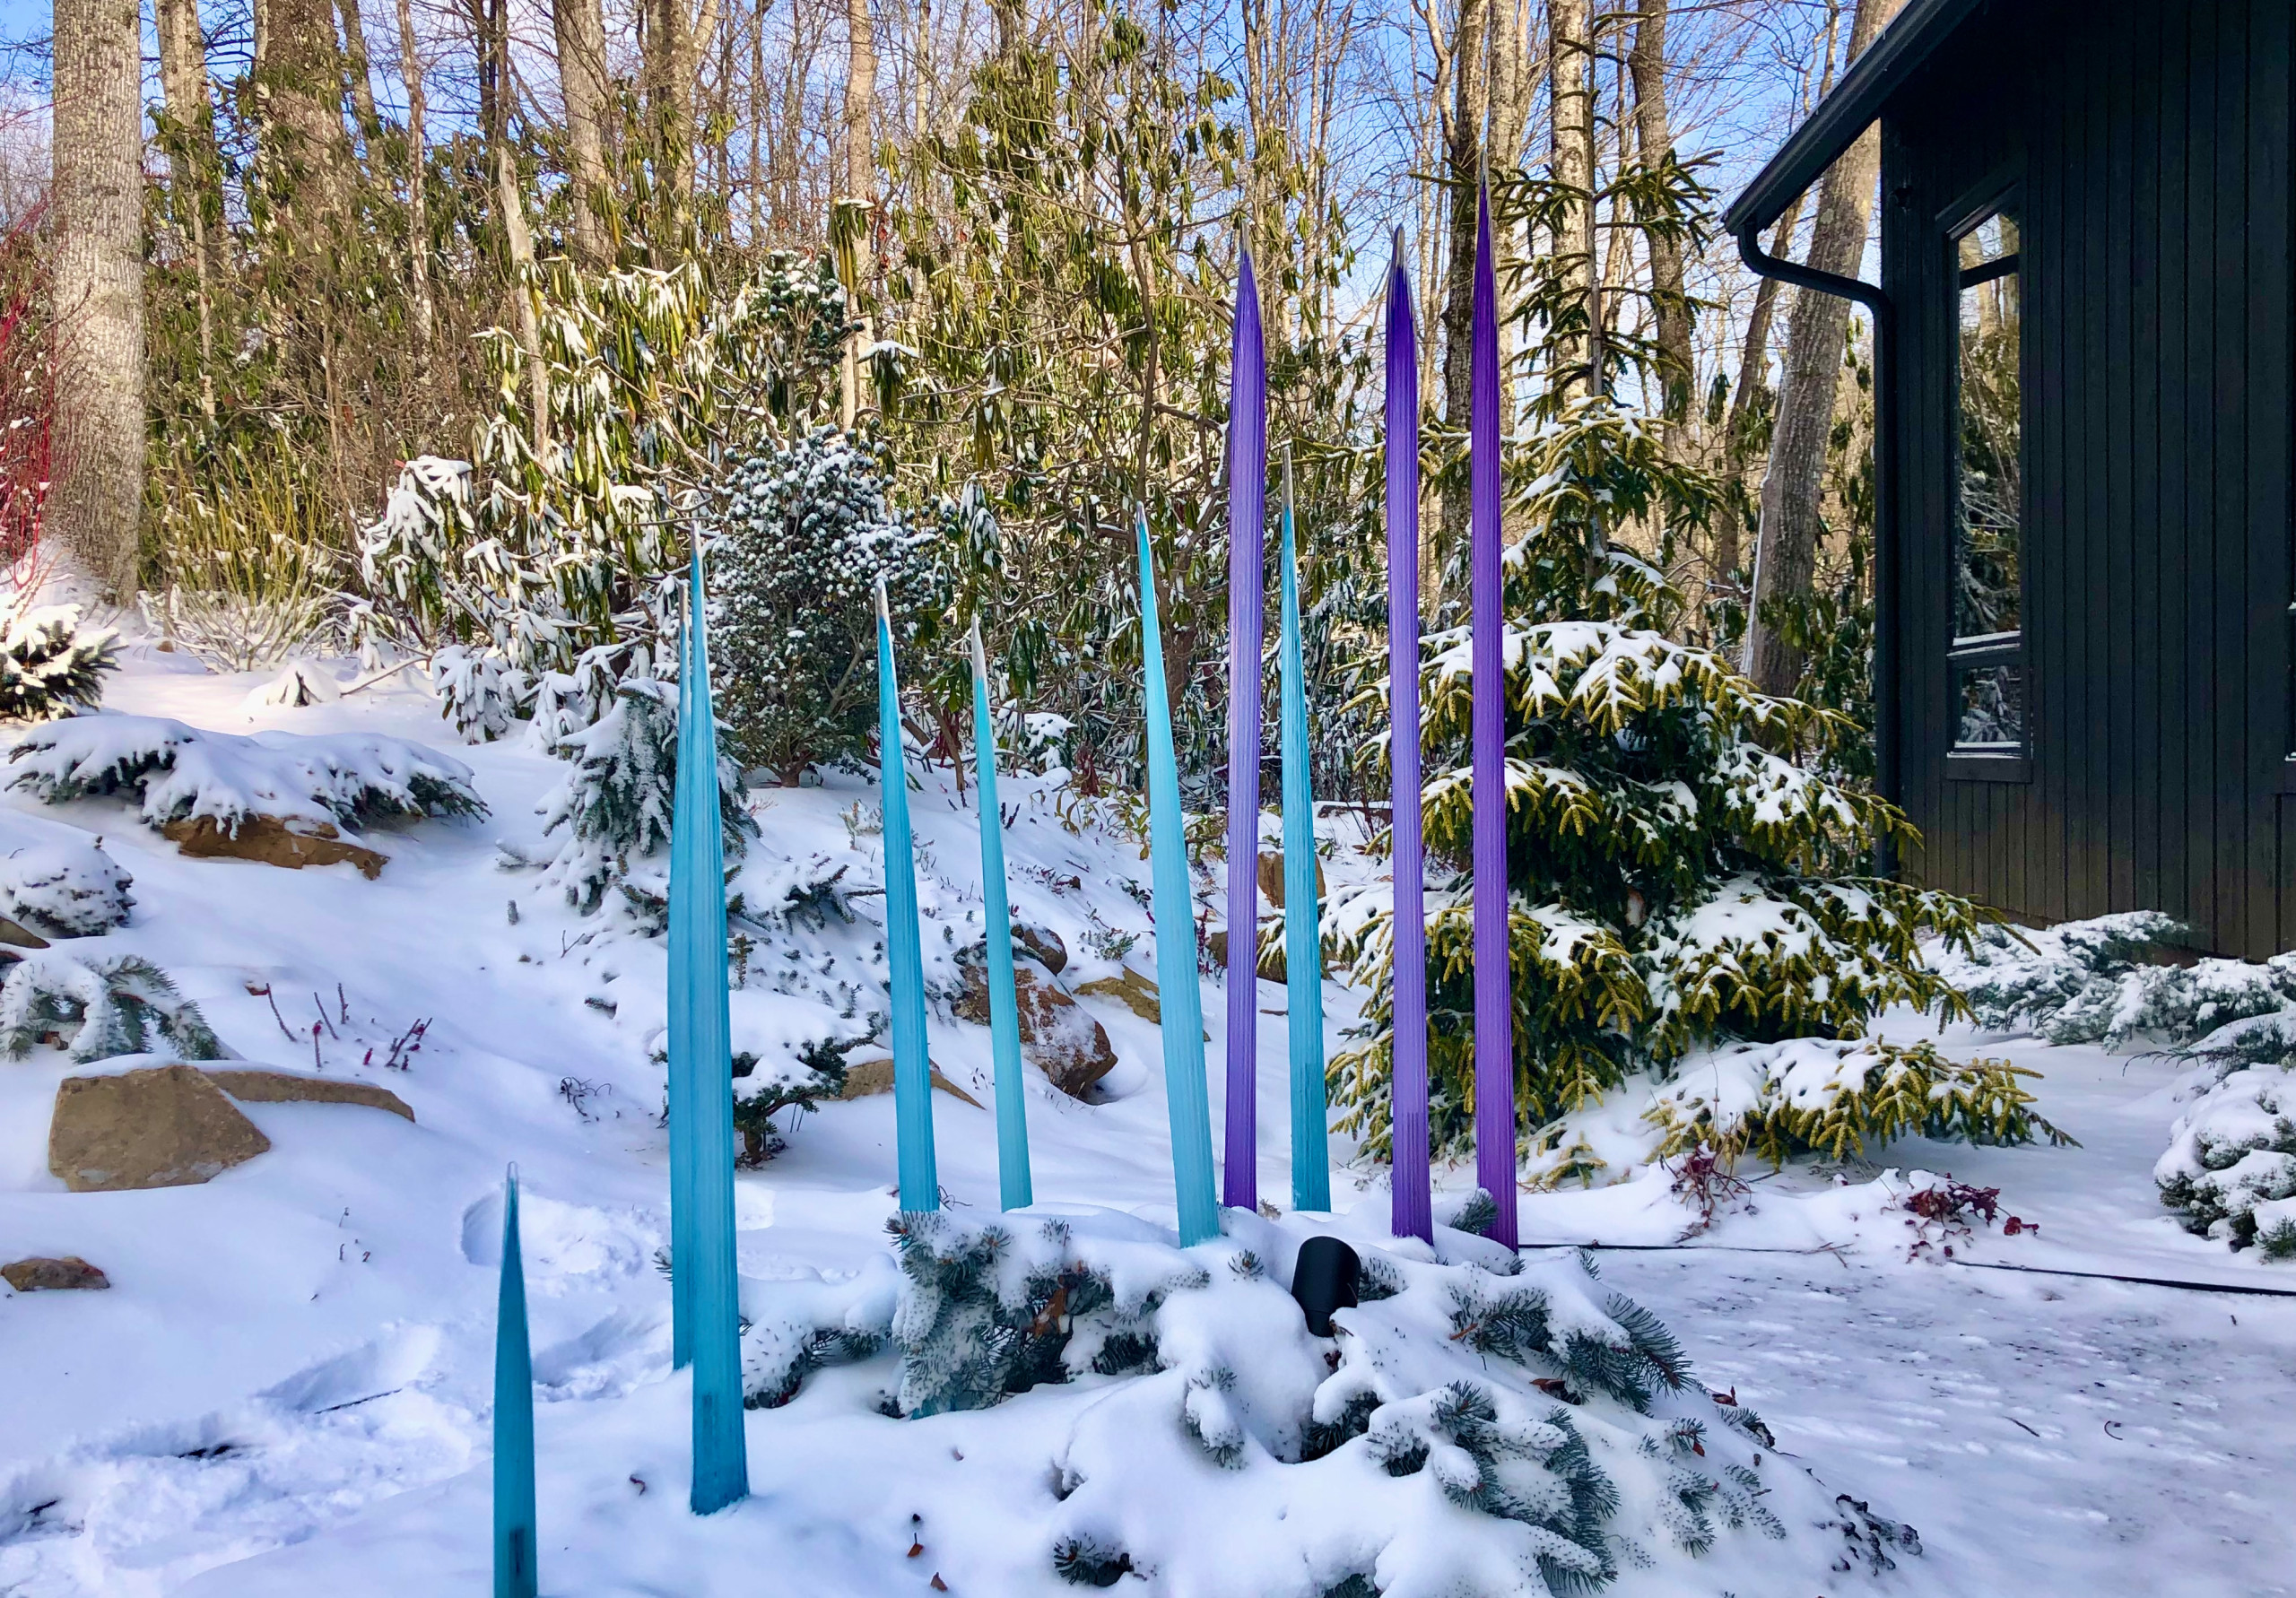 Glass art and snow.